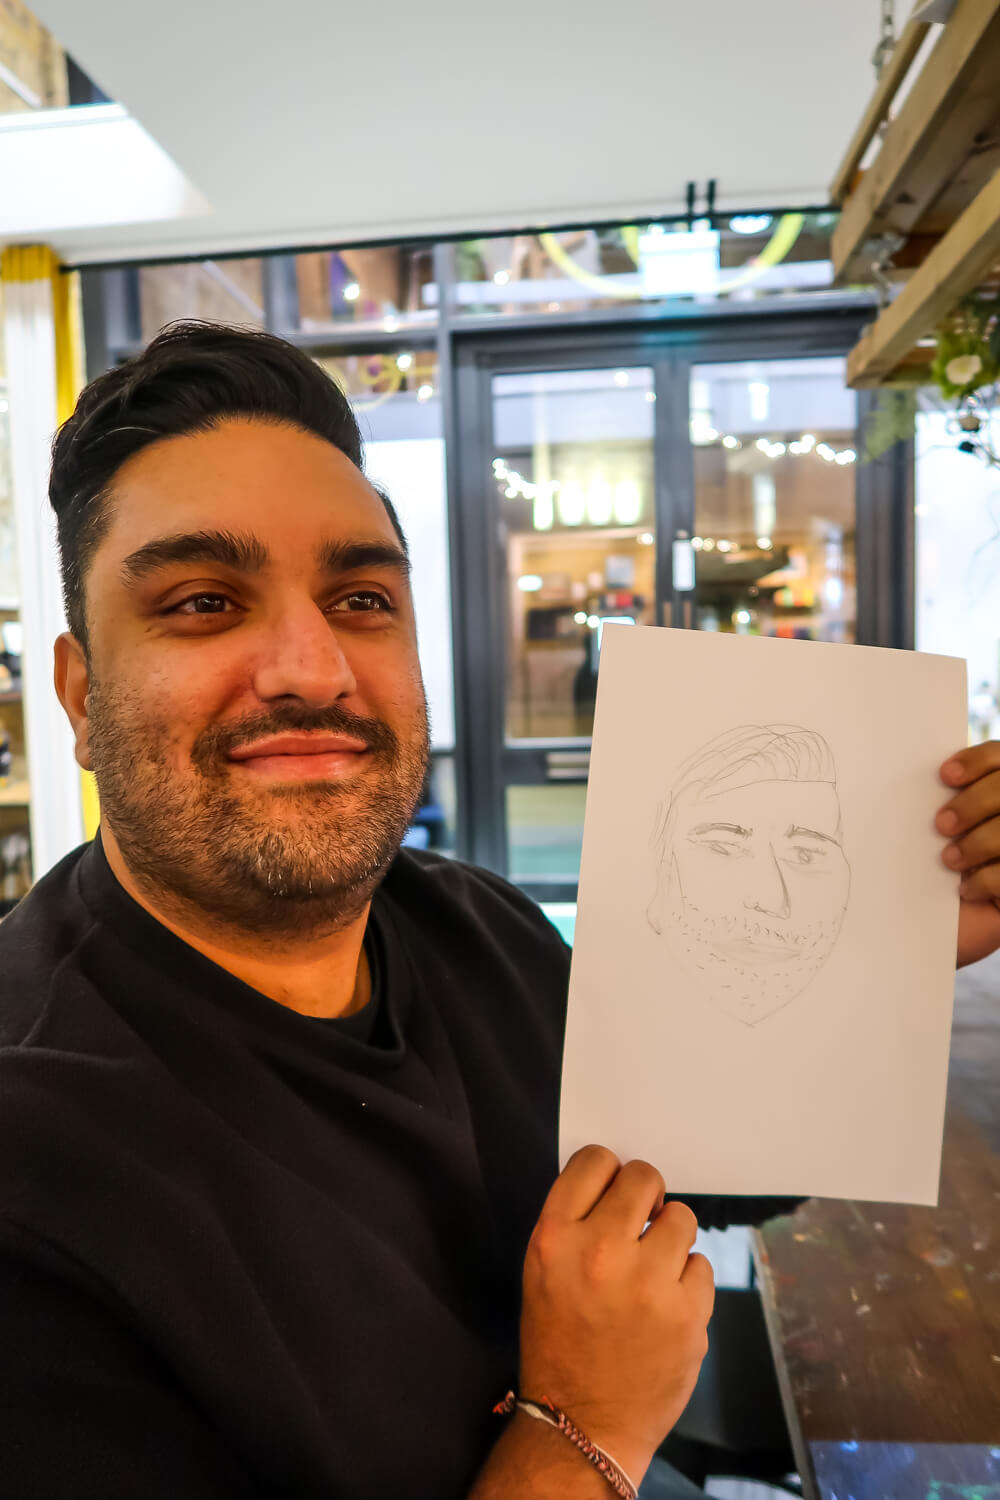 man holds up drawing on paper that vaguely resembles him